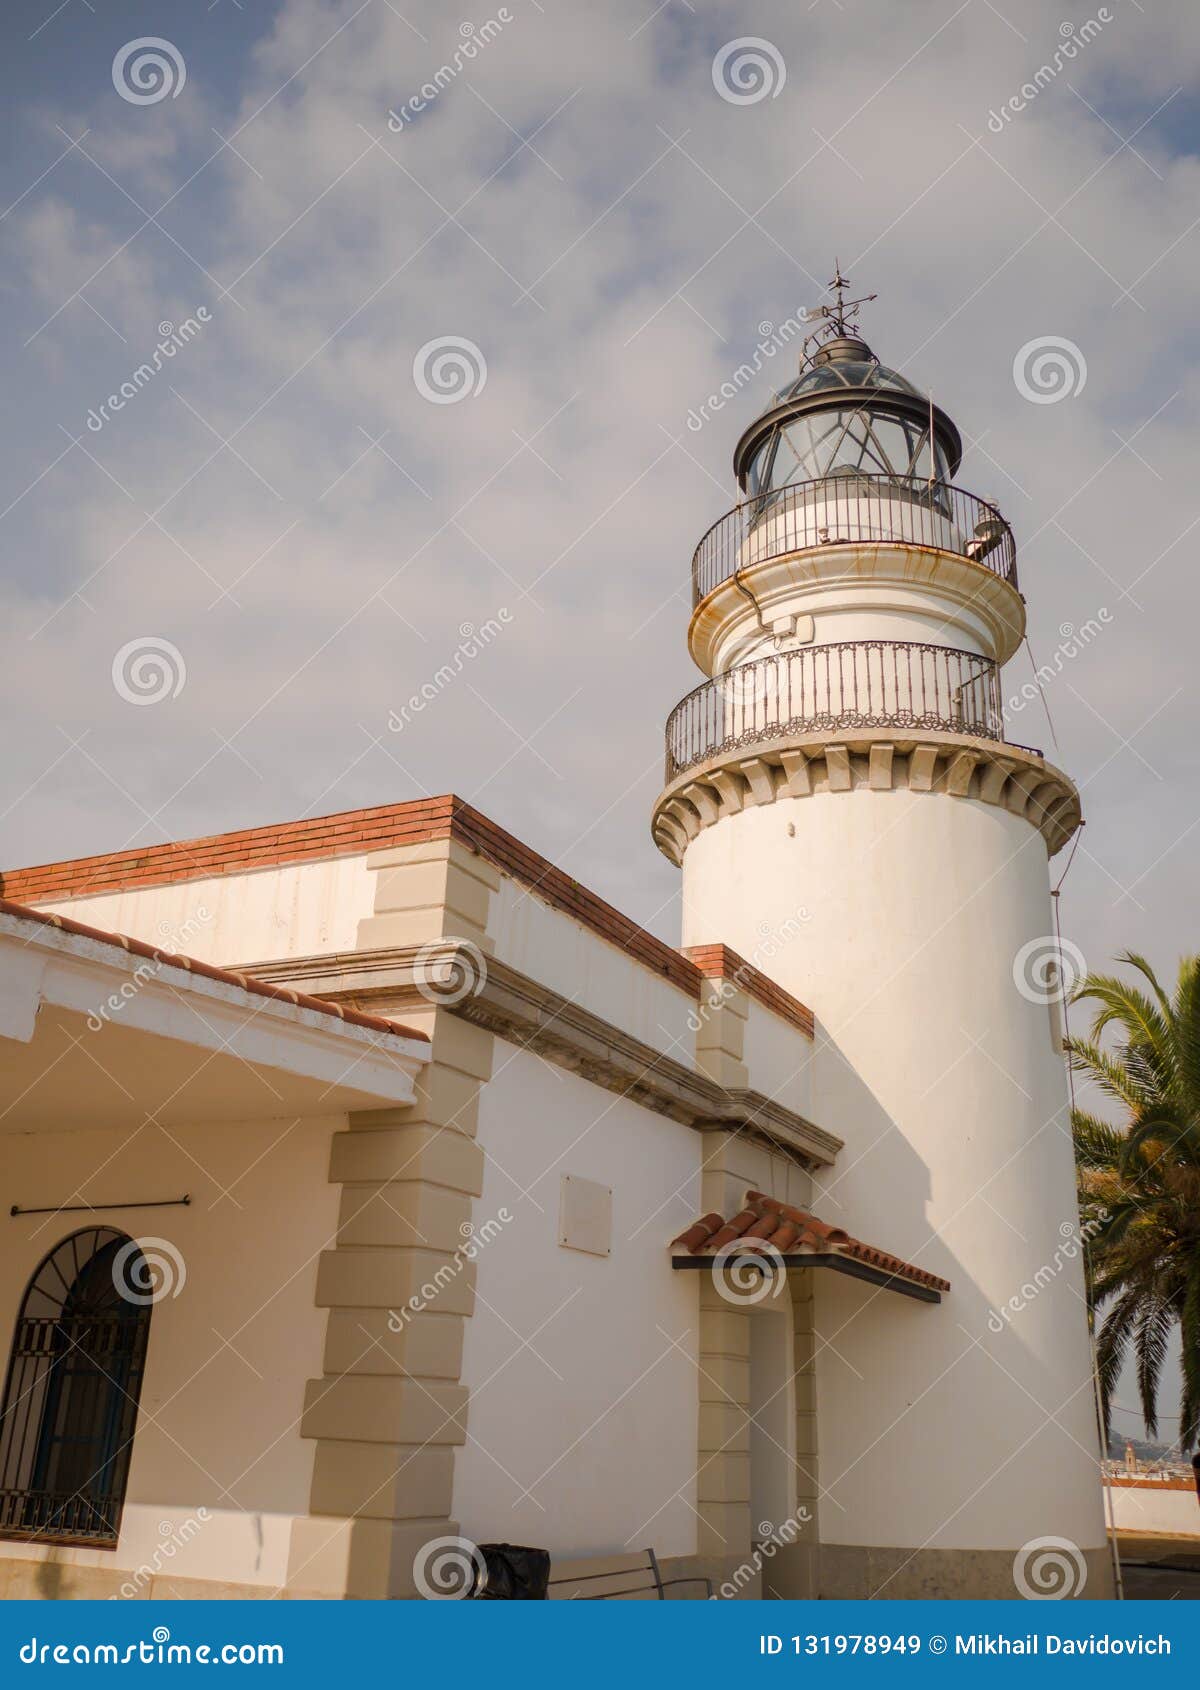 calella lighthouse is active lighthouse situated in coastal town of calella in costa del maresme, catalonia, spain